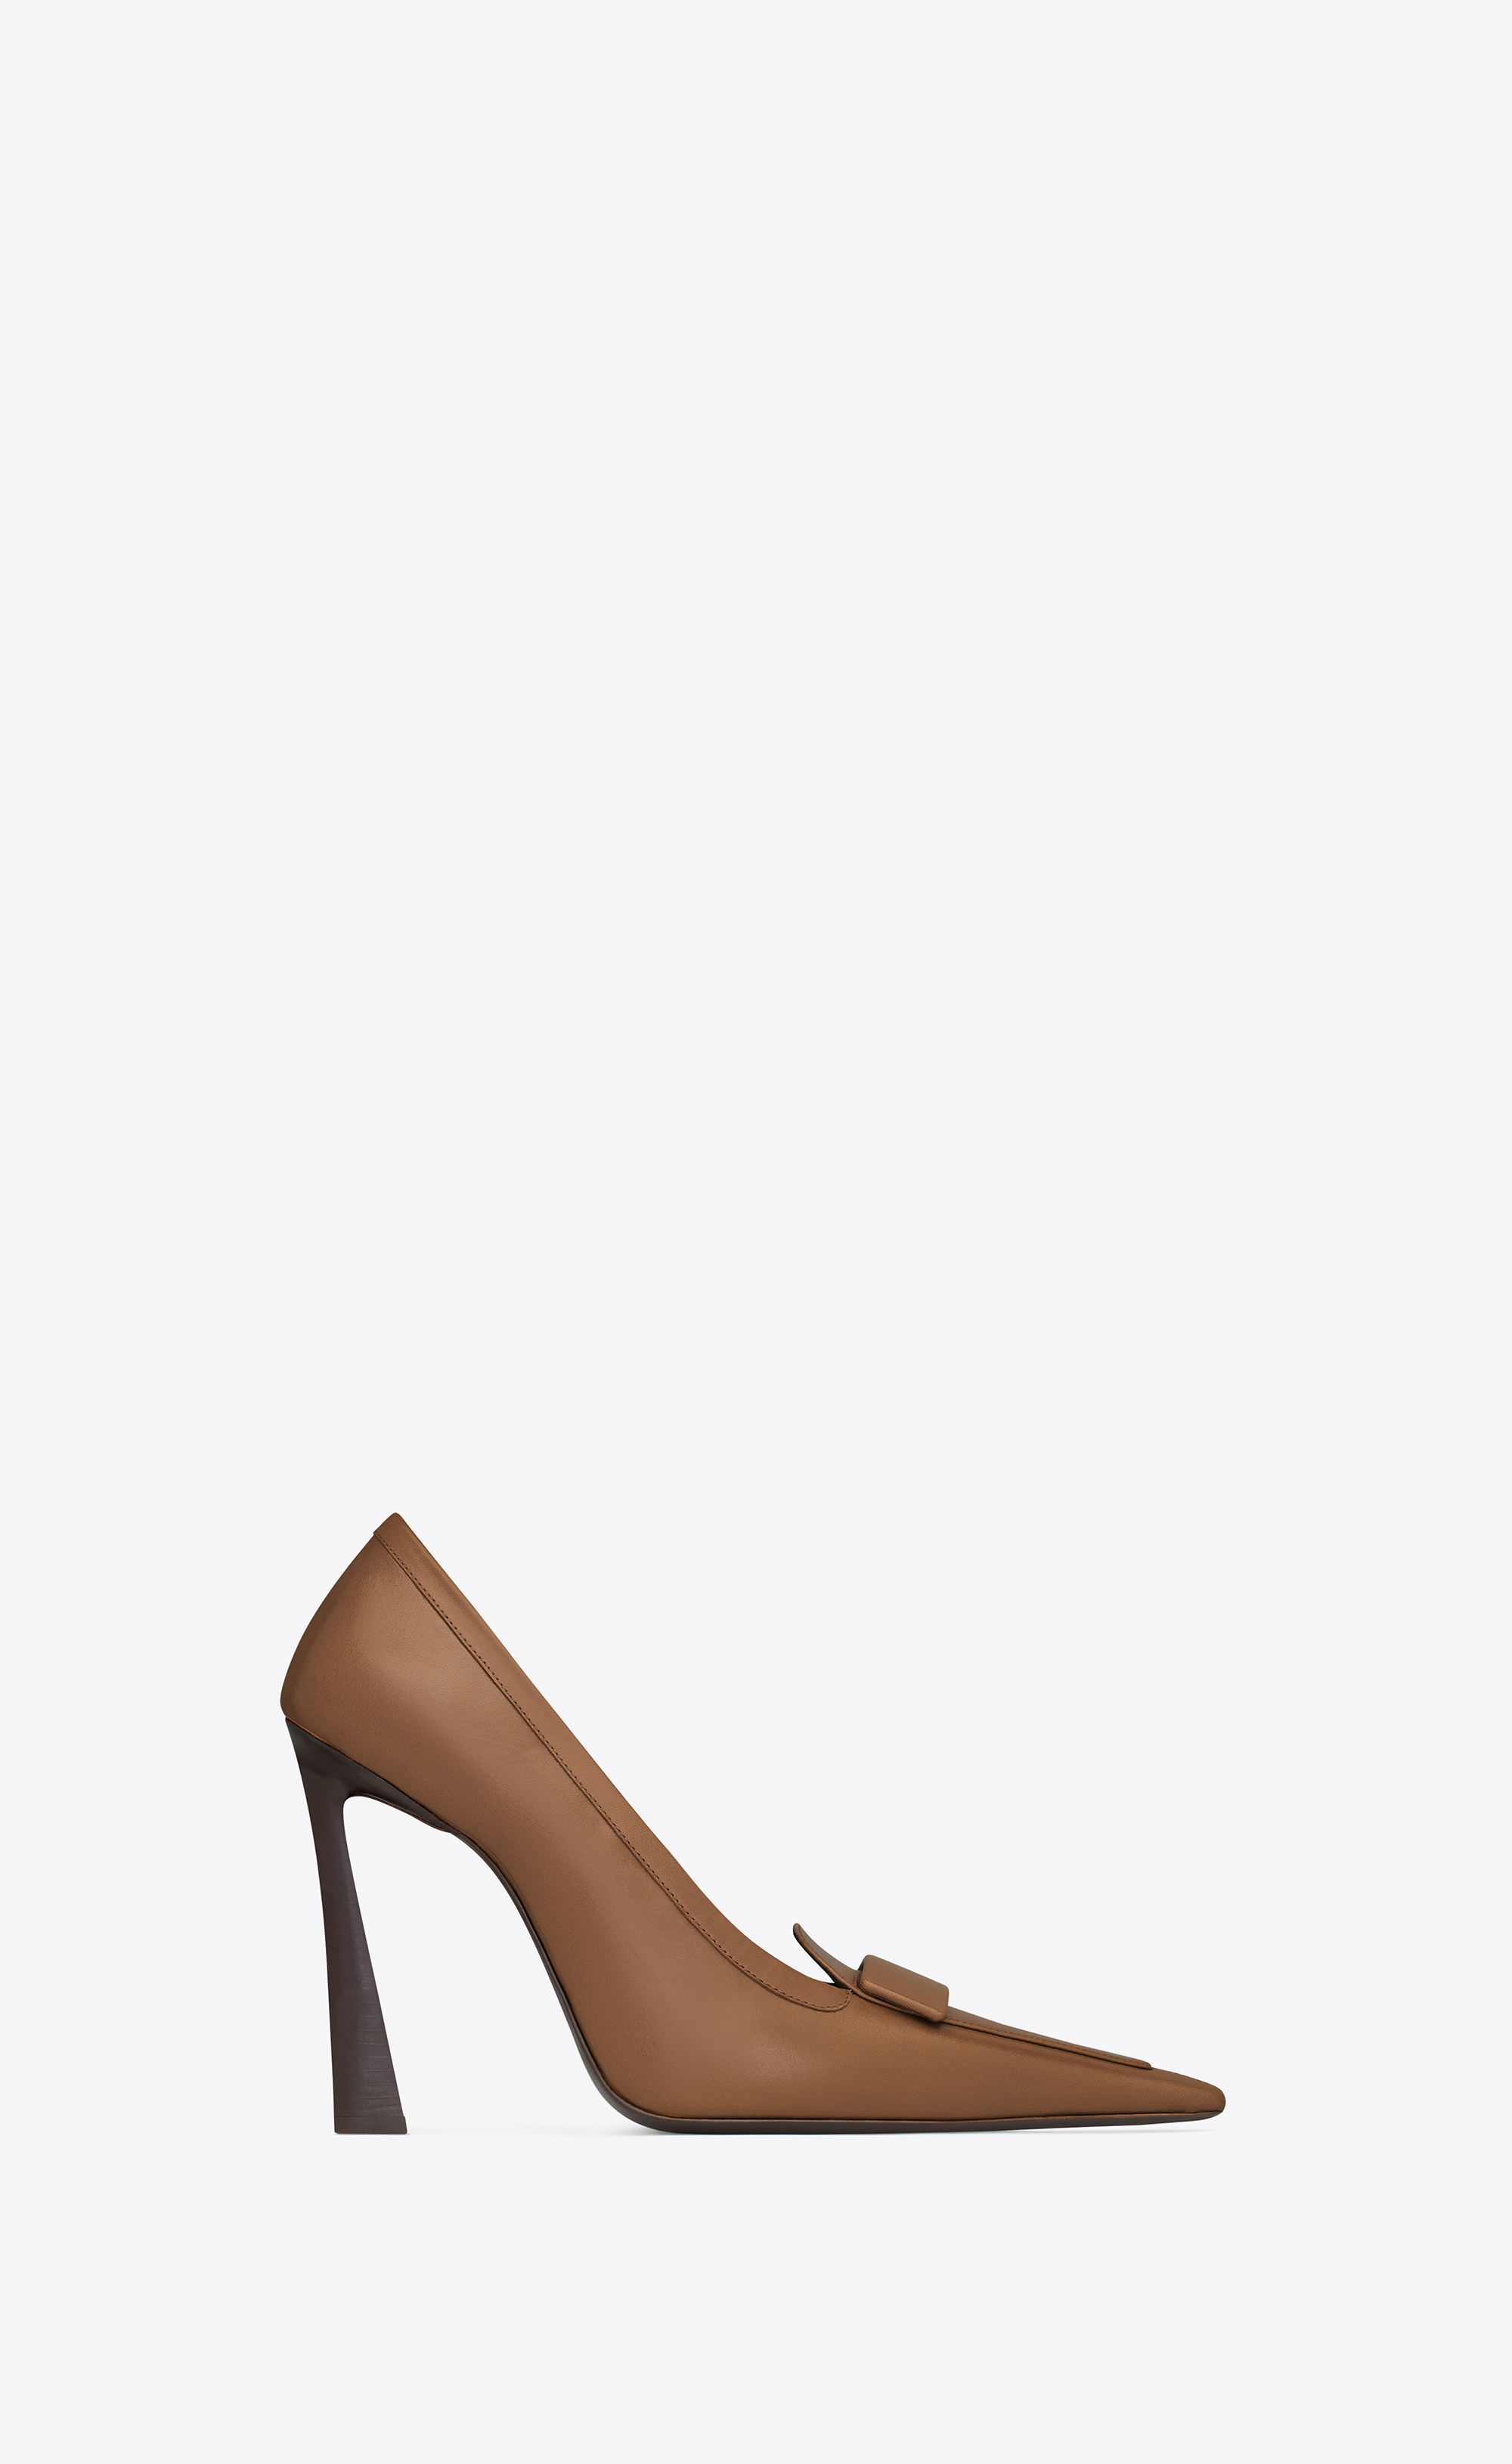 D'ORSAY PUMPS IN SMOOTH LEATHER